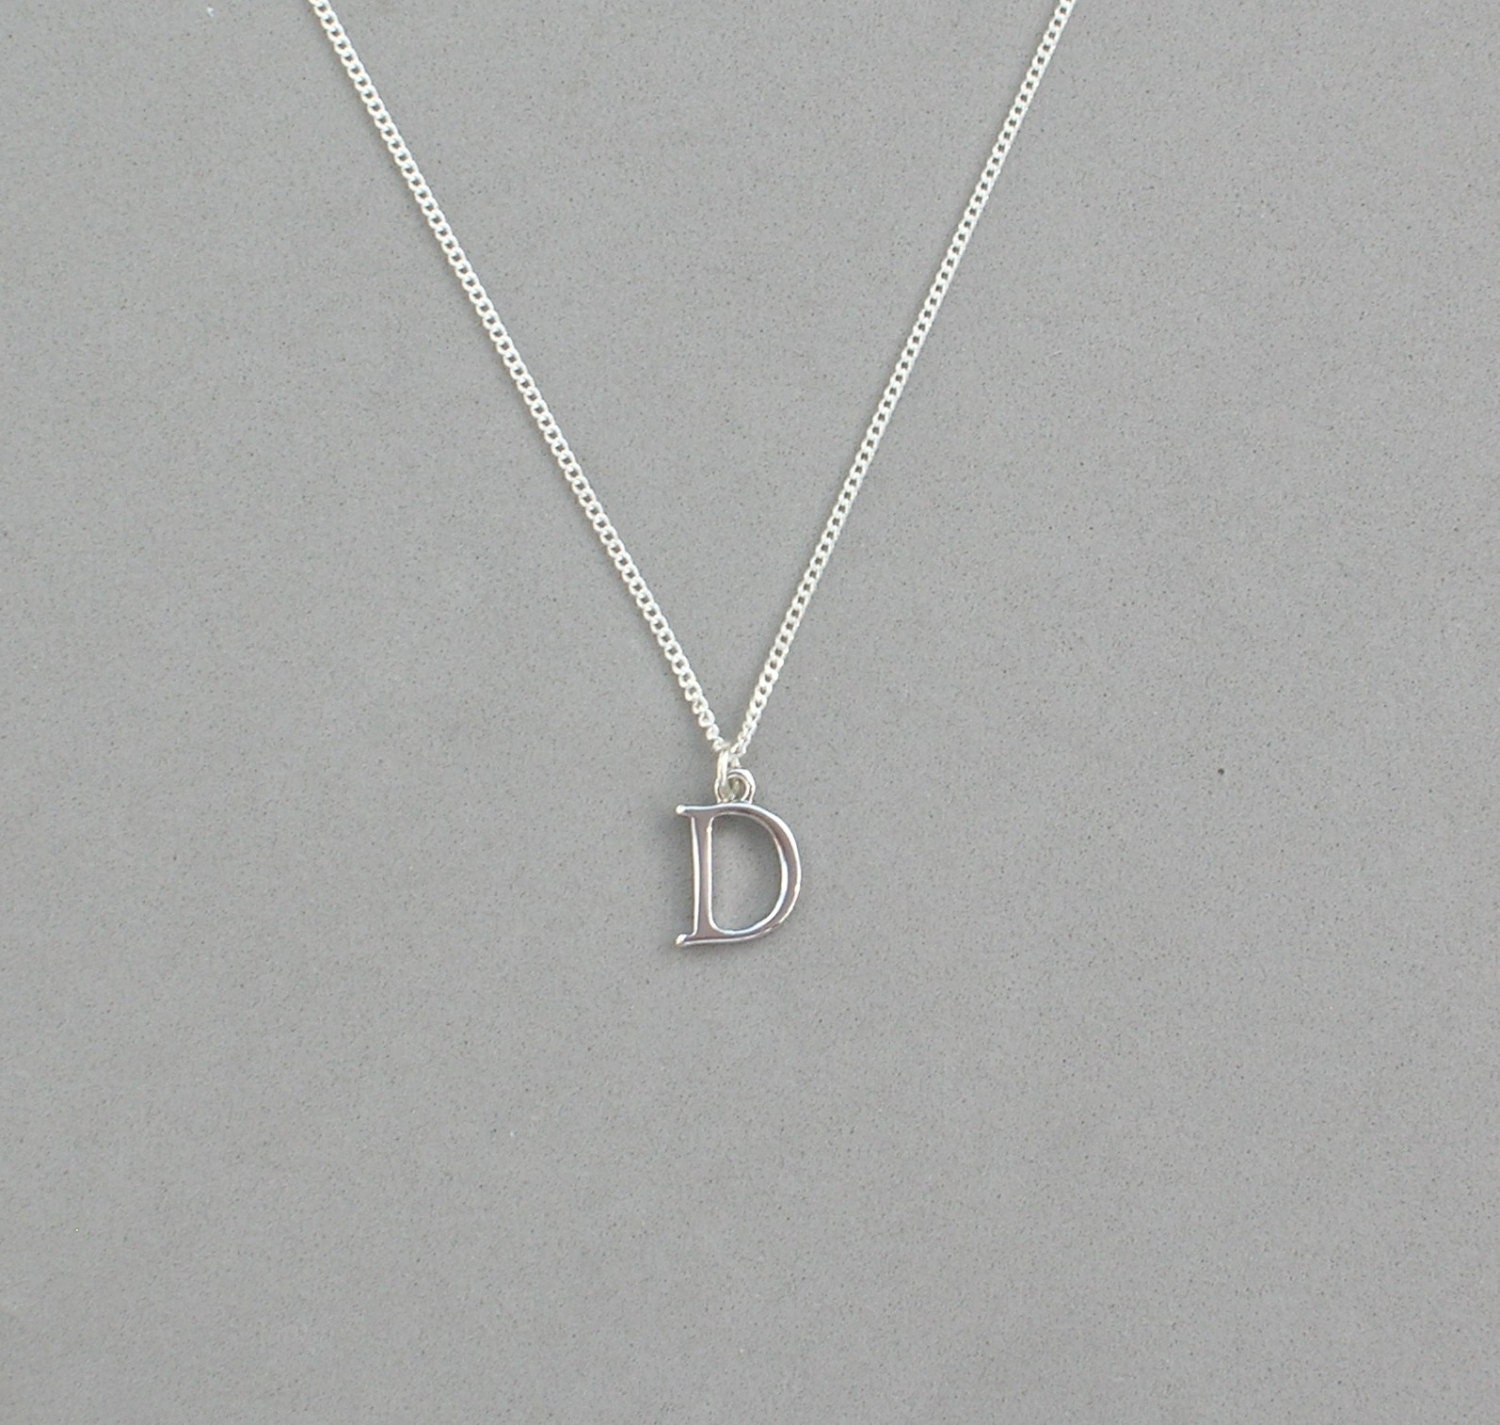 D Necklace – Twojeys